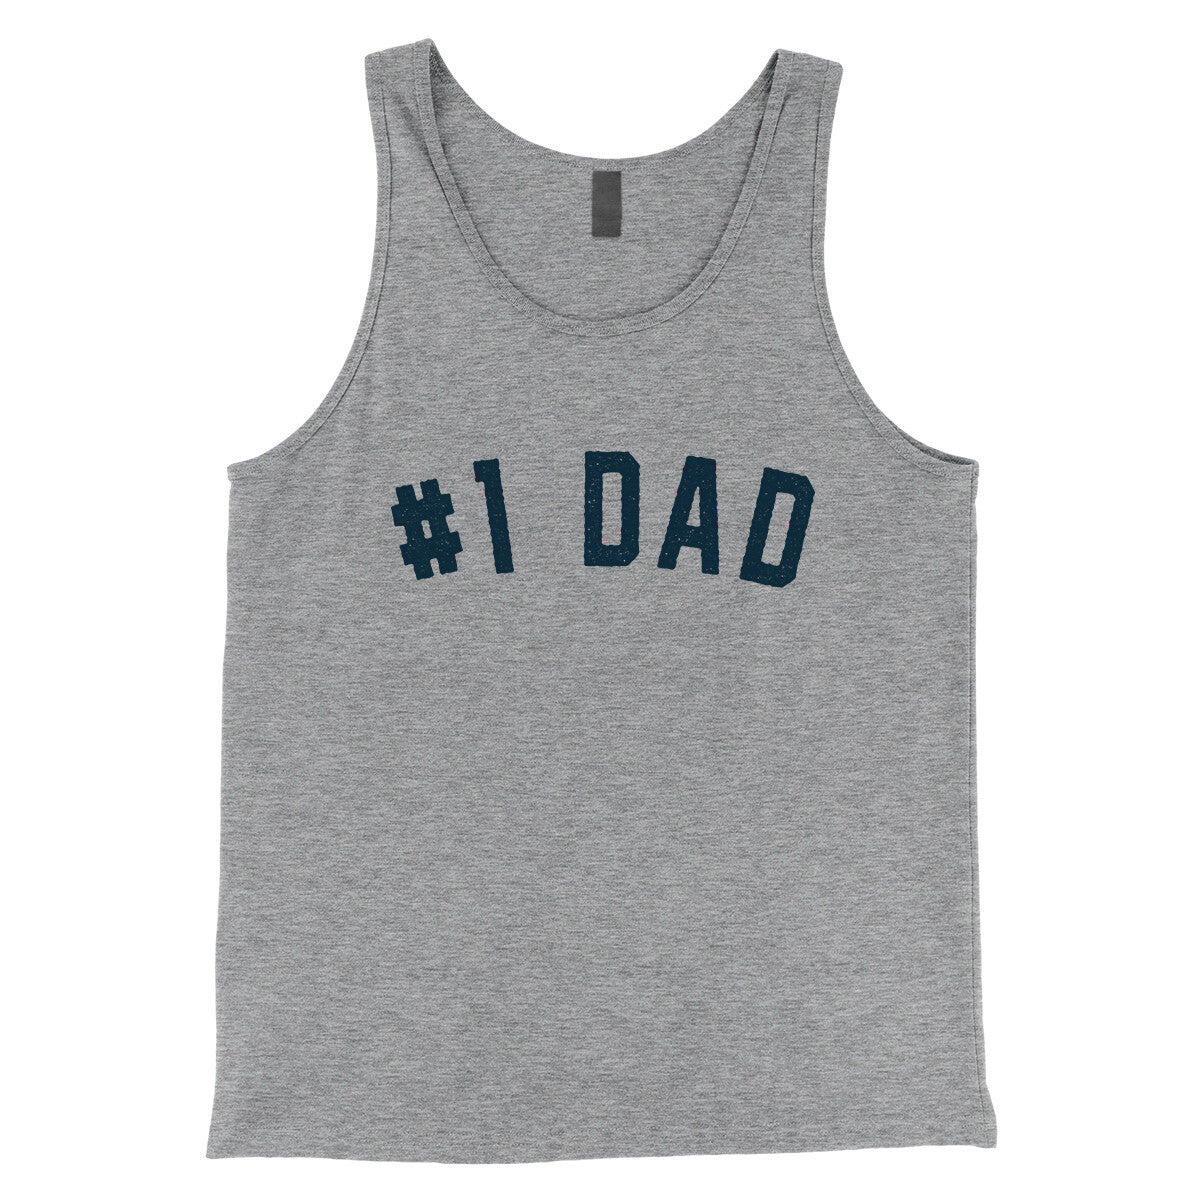 Number 1 Dad in Athletic Heather Color